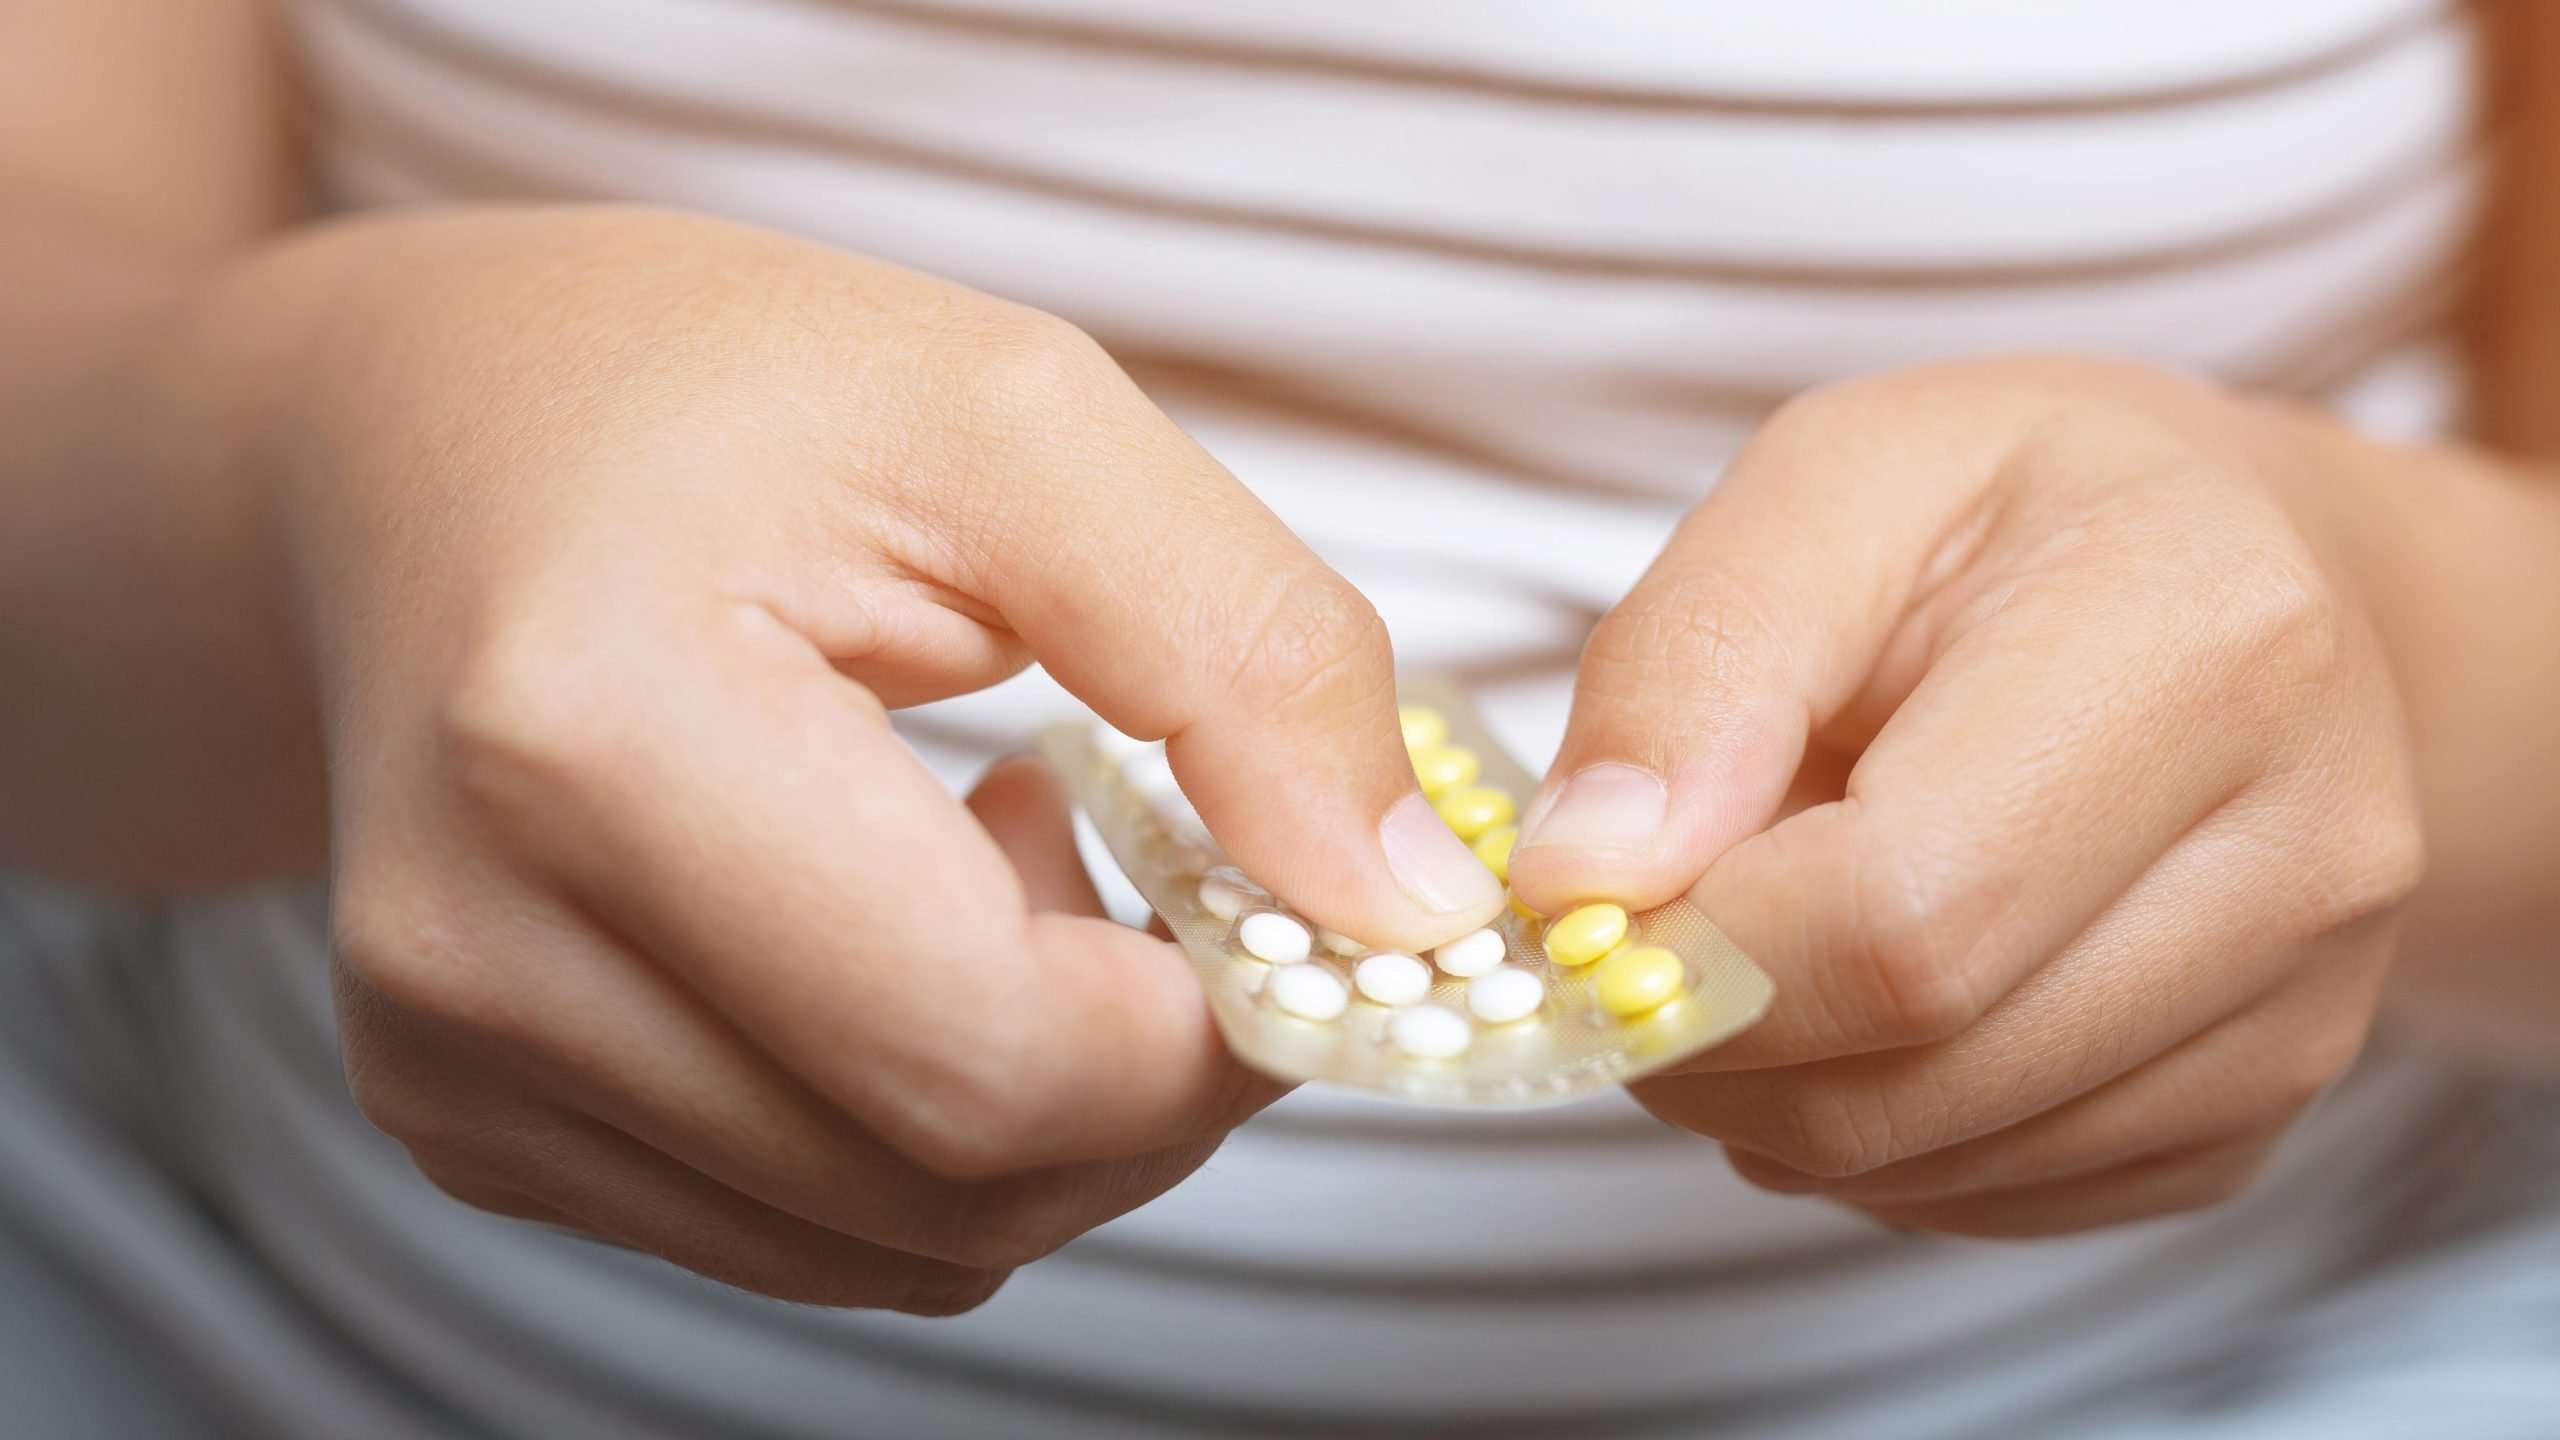 Does hormonal birth control cause or prevent acne?